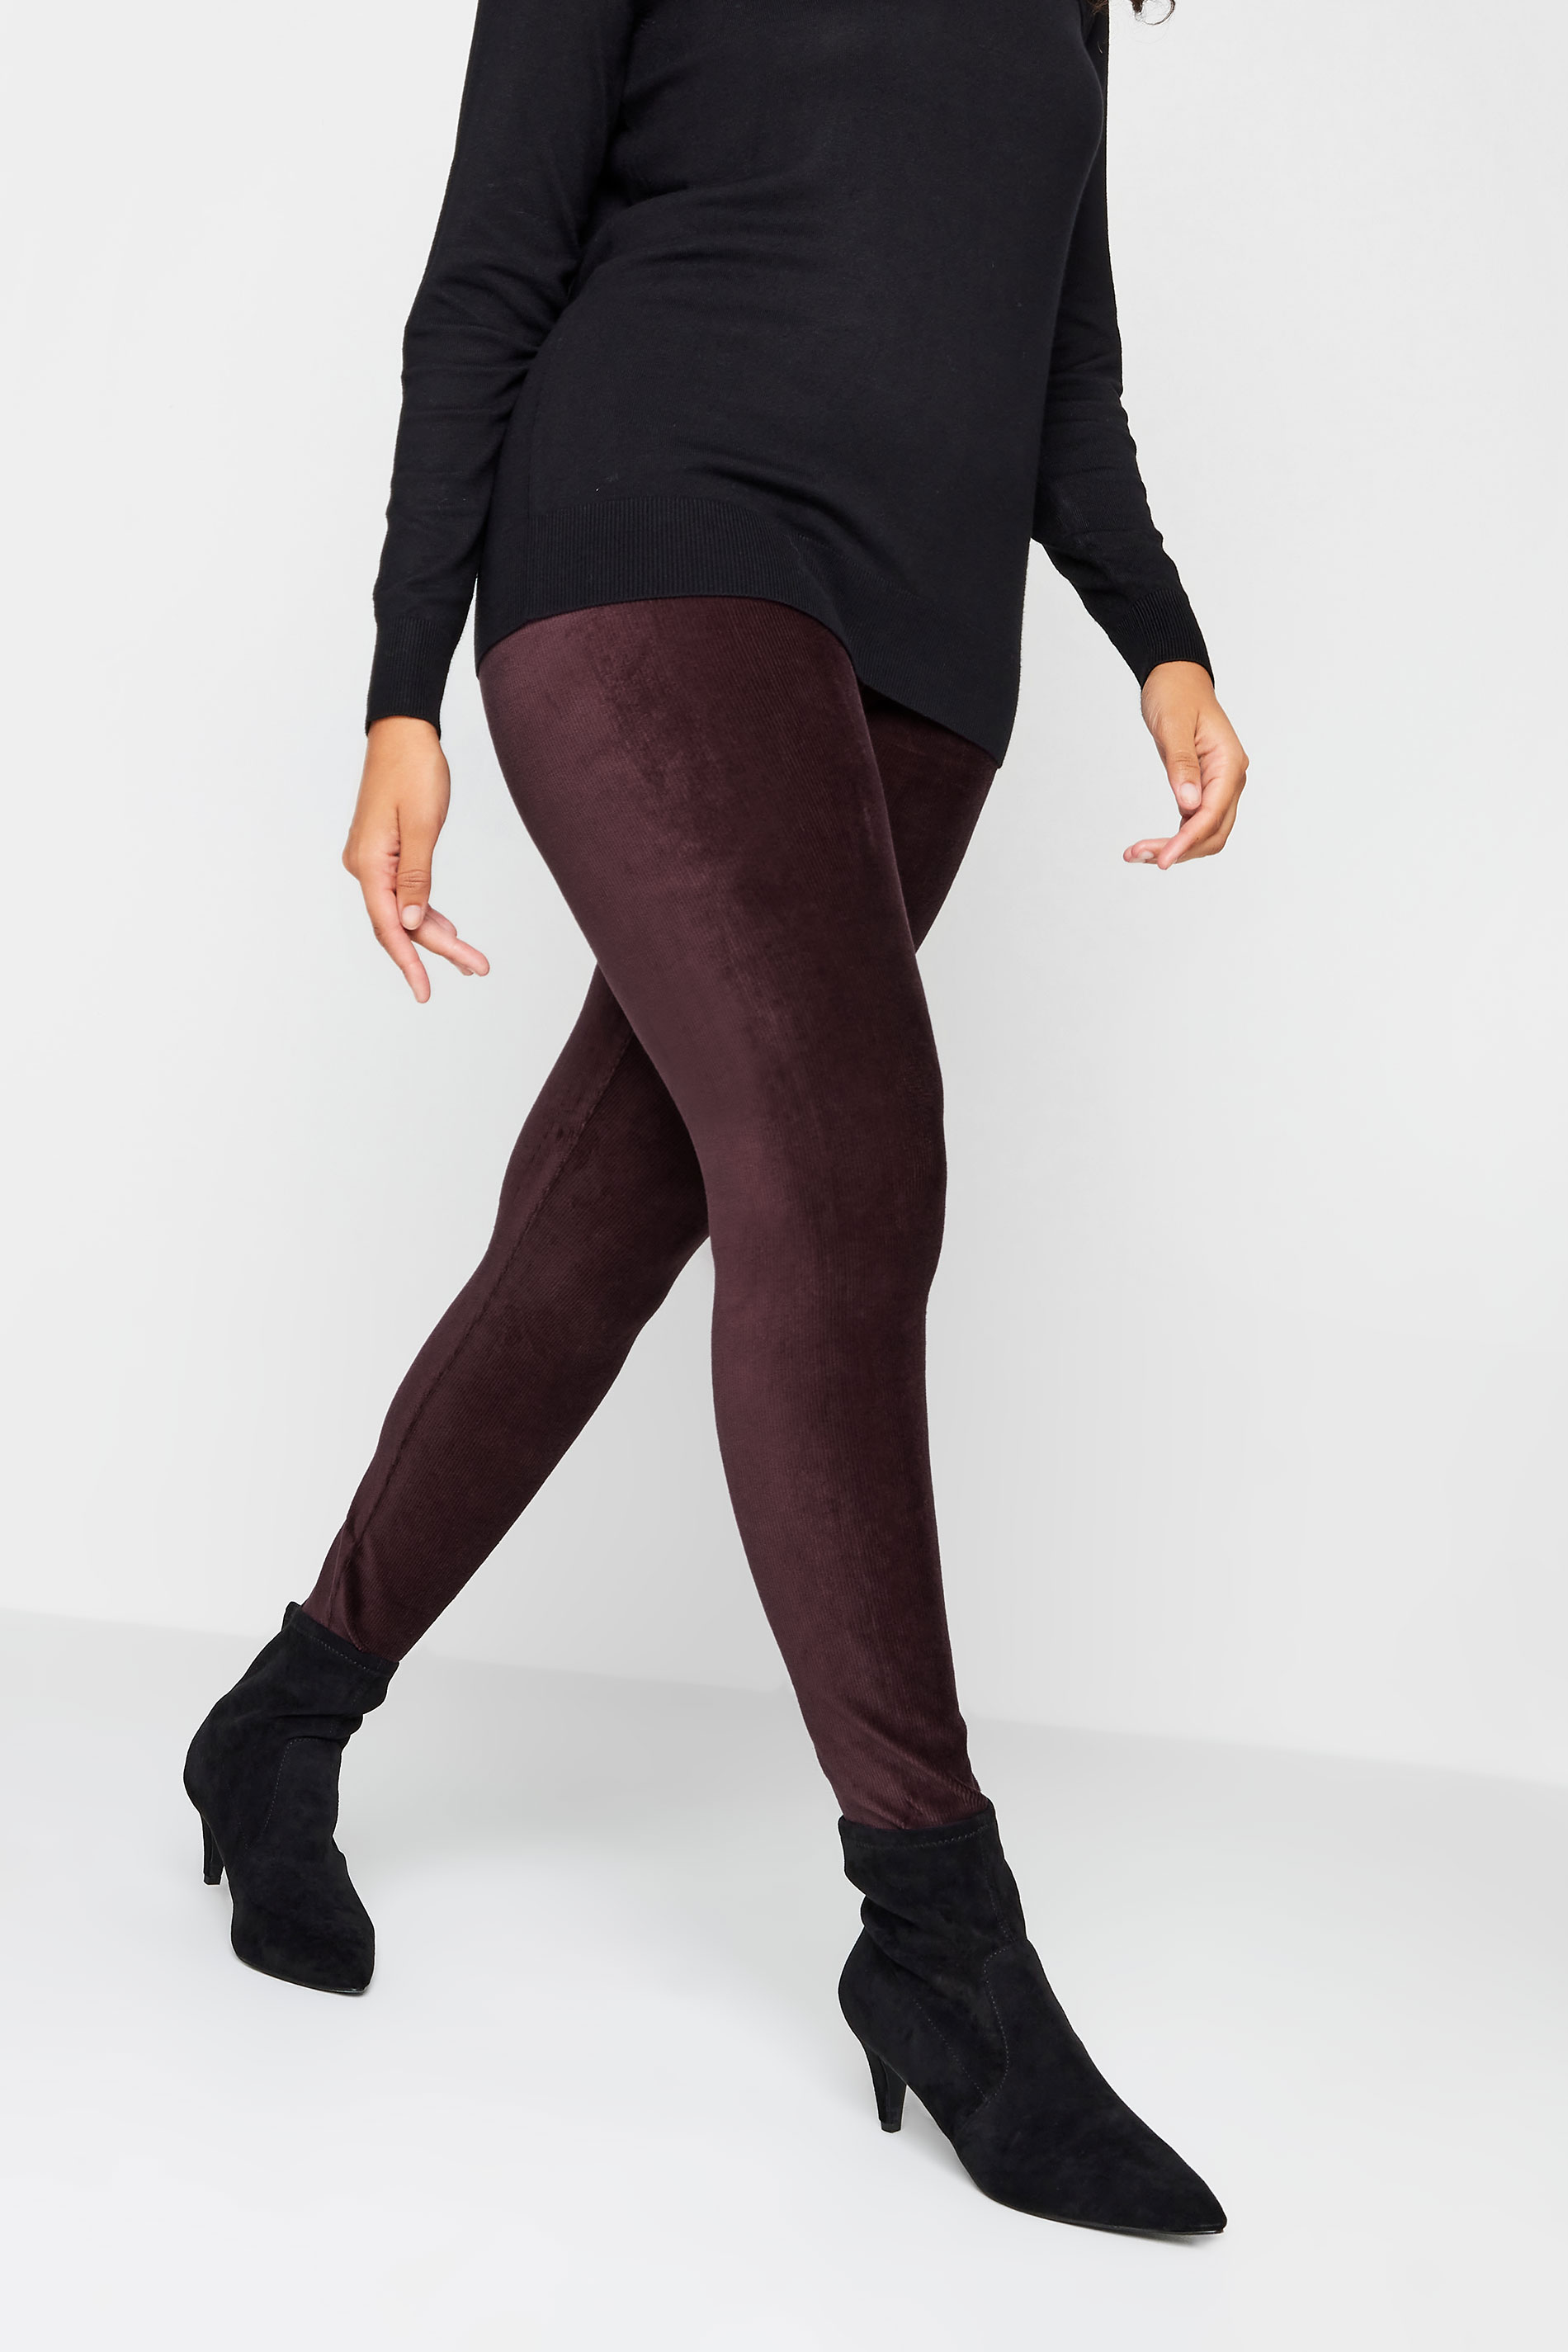 M&Co Berry Red Cord Stretch Leggings | M&Co 1